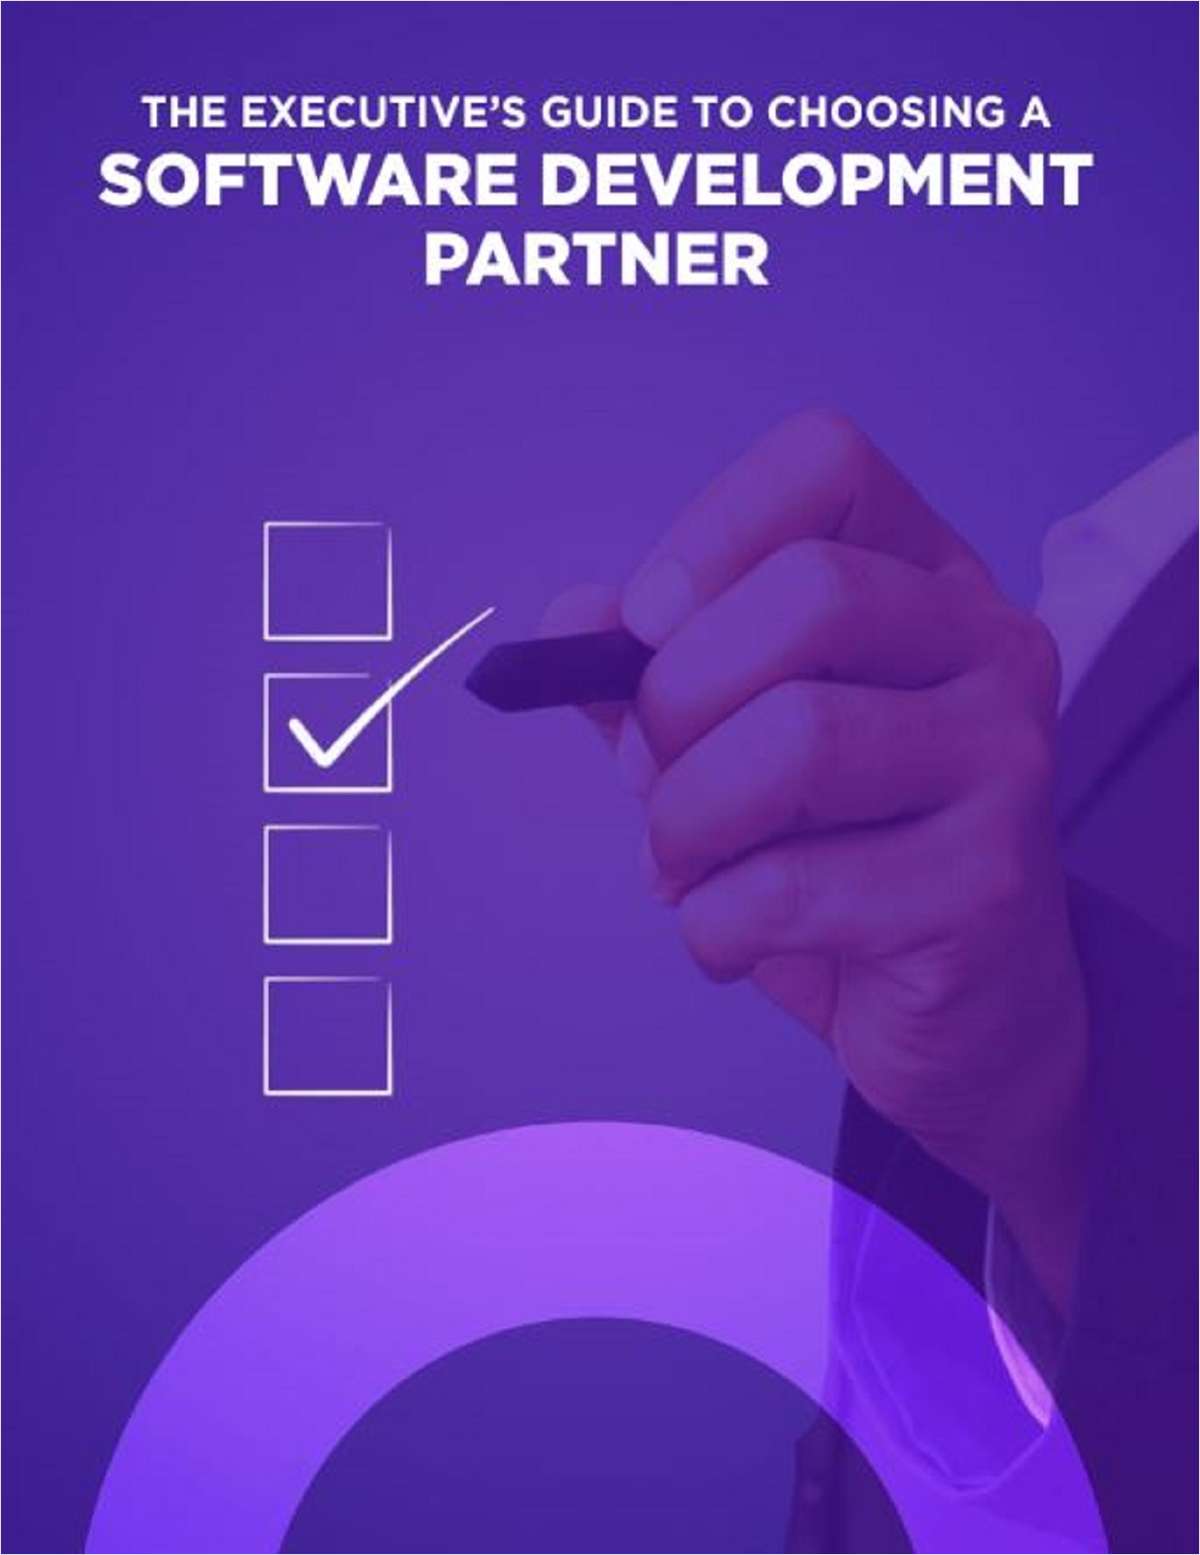 The Executive's Guide to Choosing a Software Development Partner